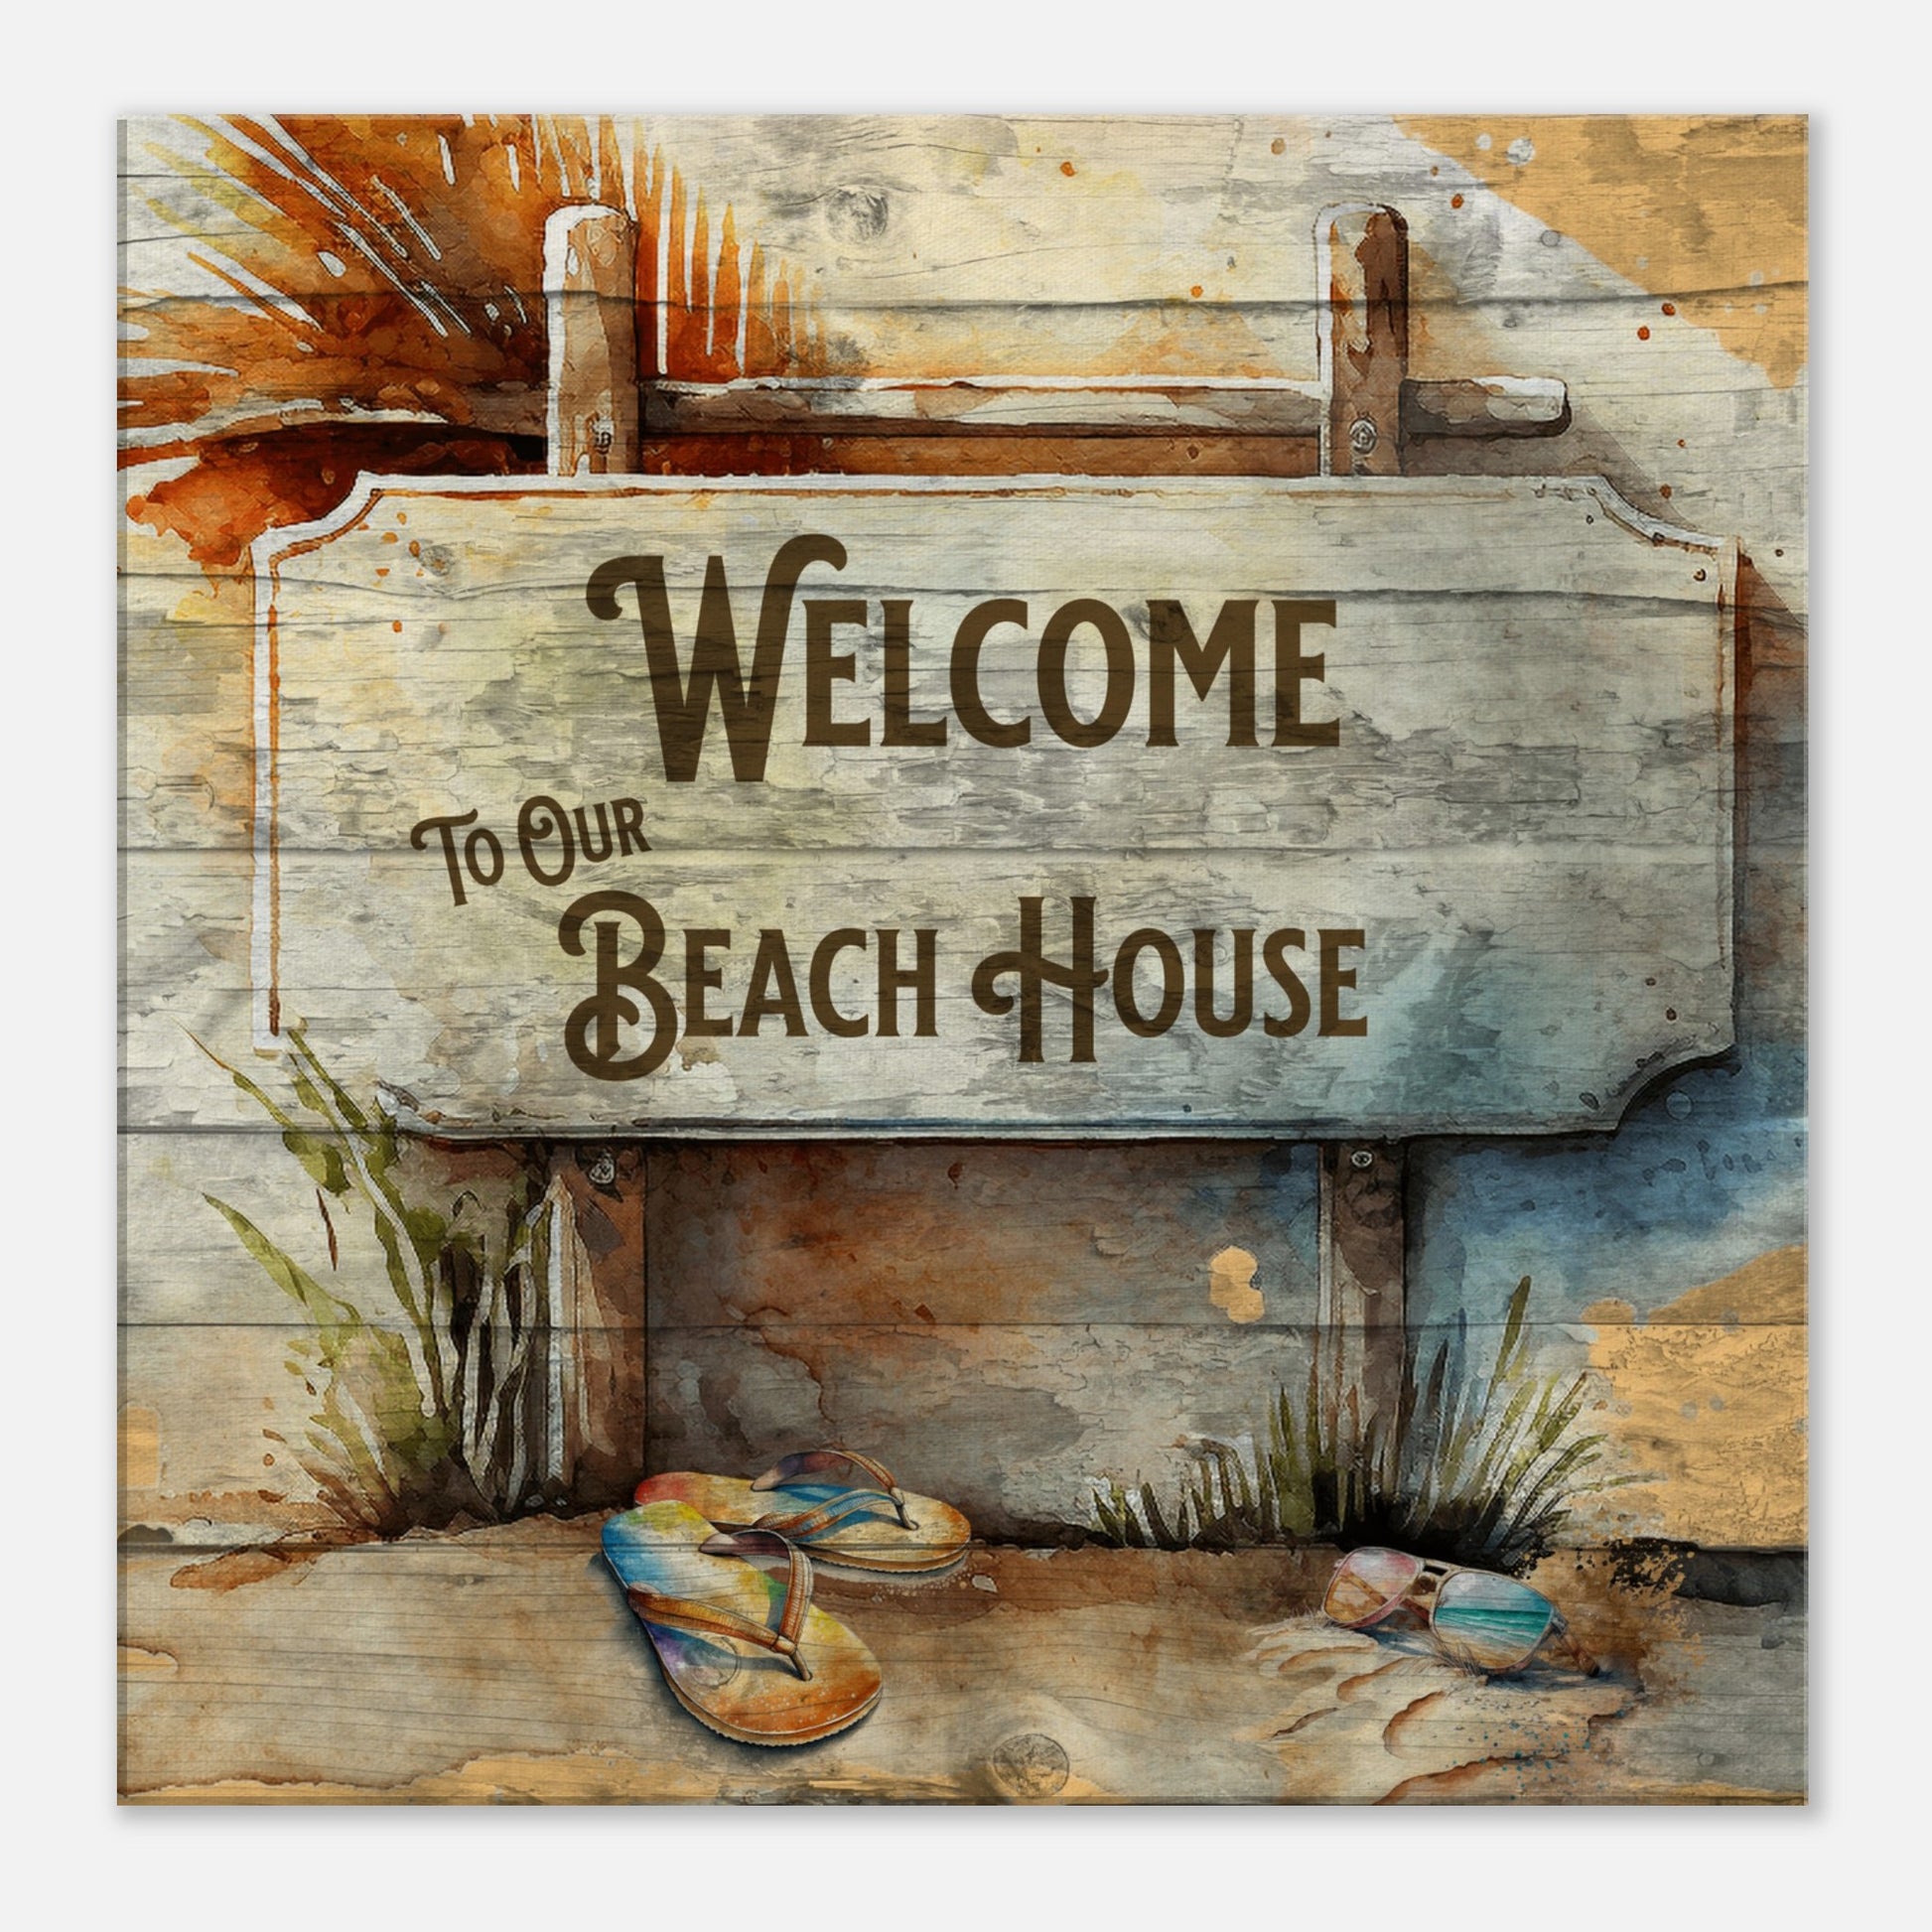 Welcome To Our Beach House Canvas Wall Print at Caribbean Rays